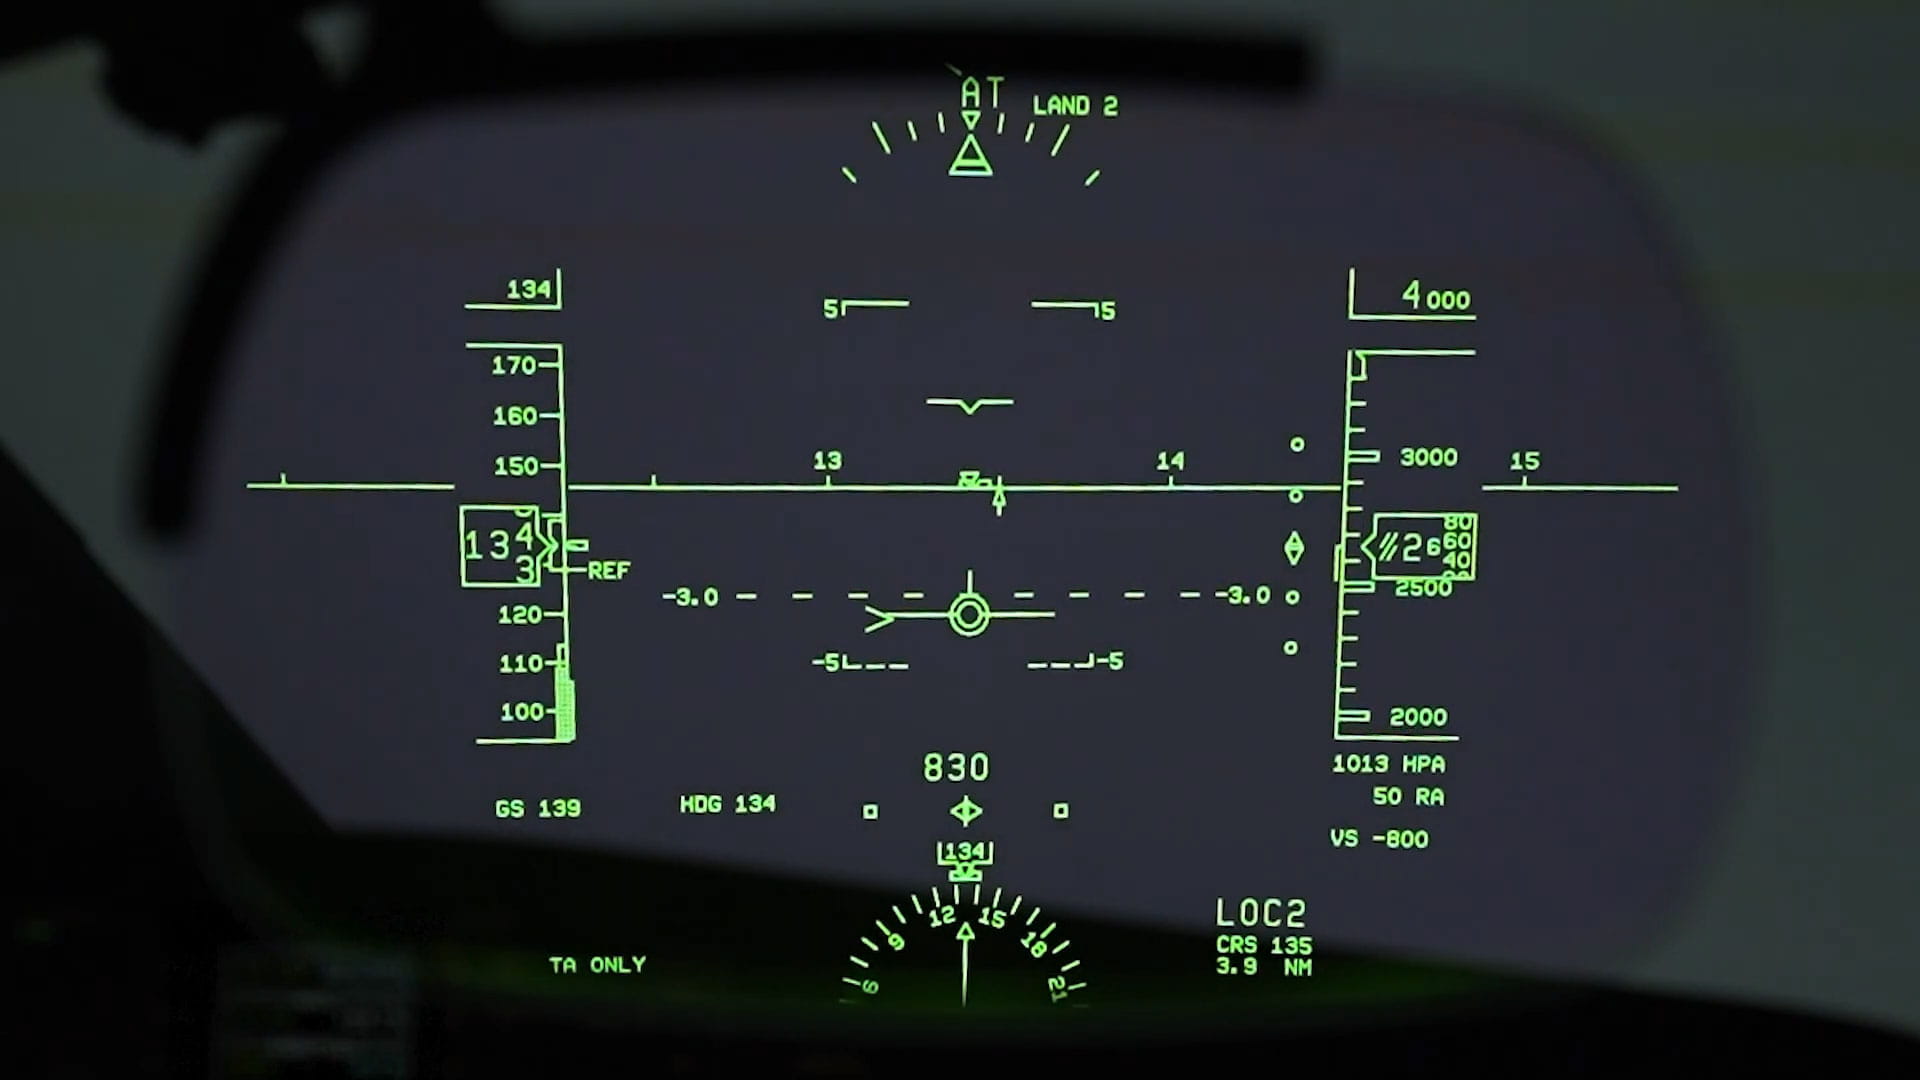 Head-up Guidance System